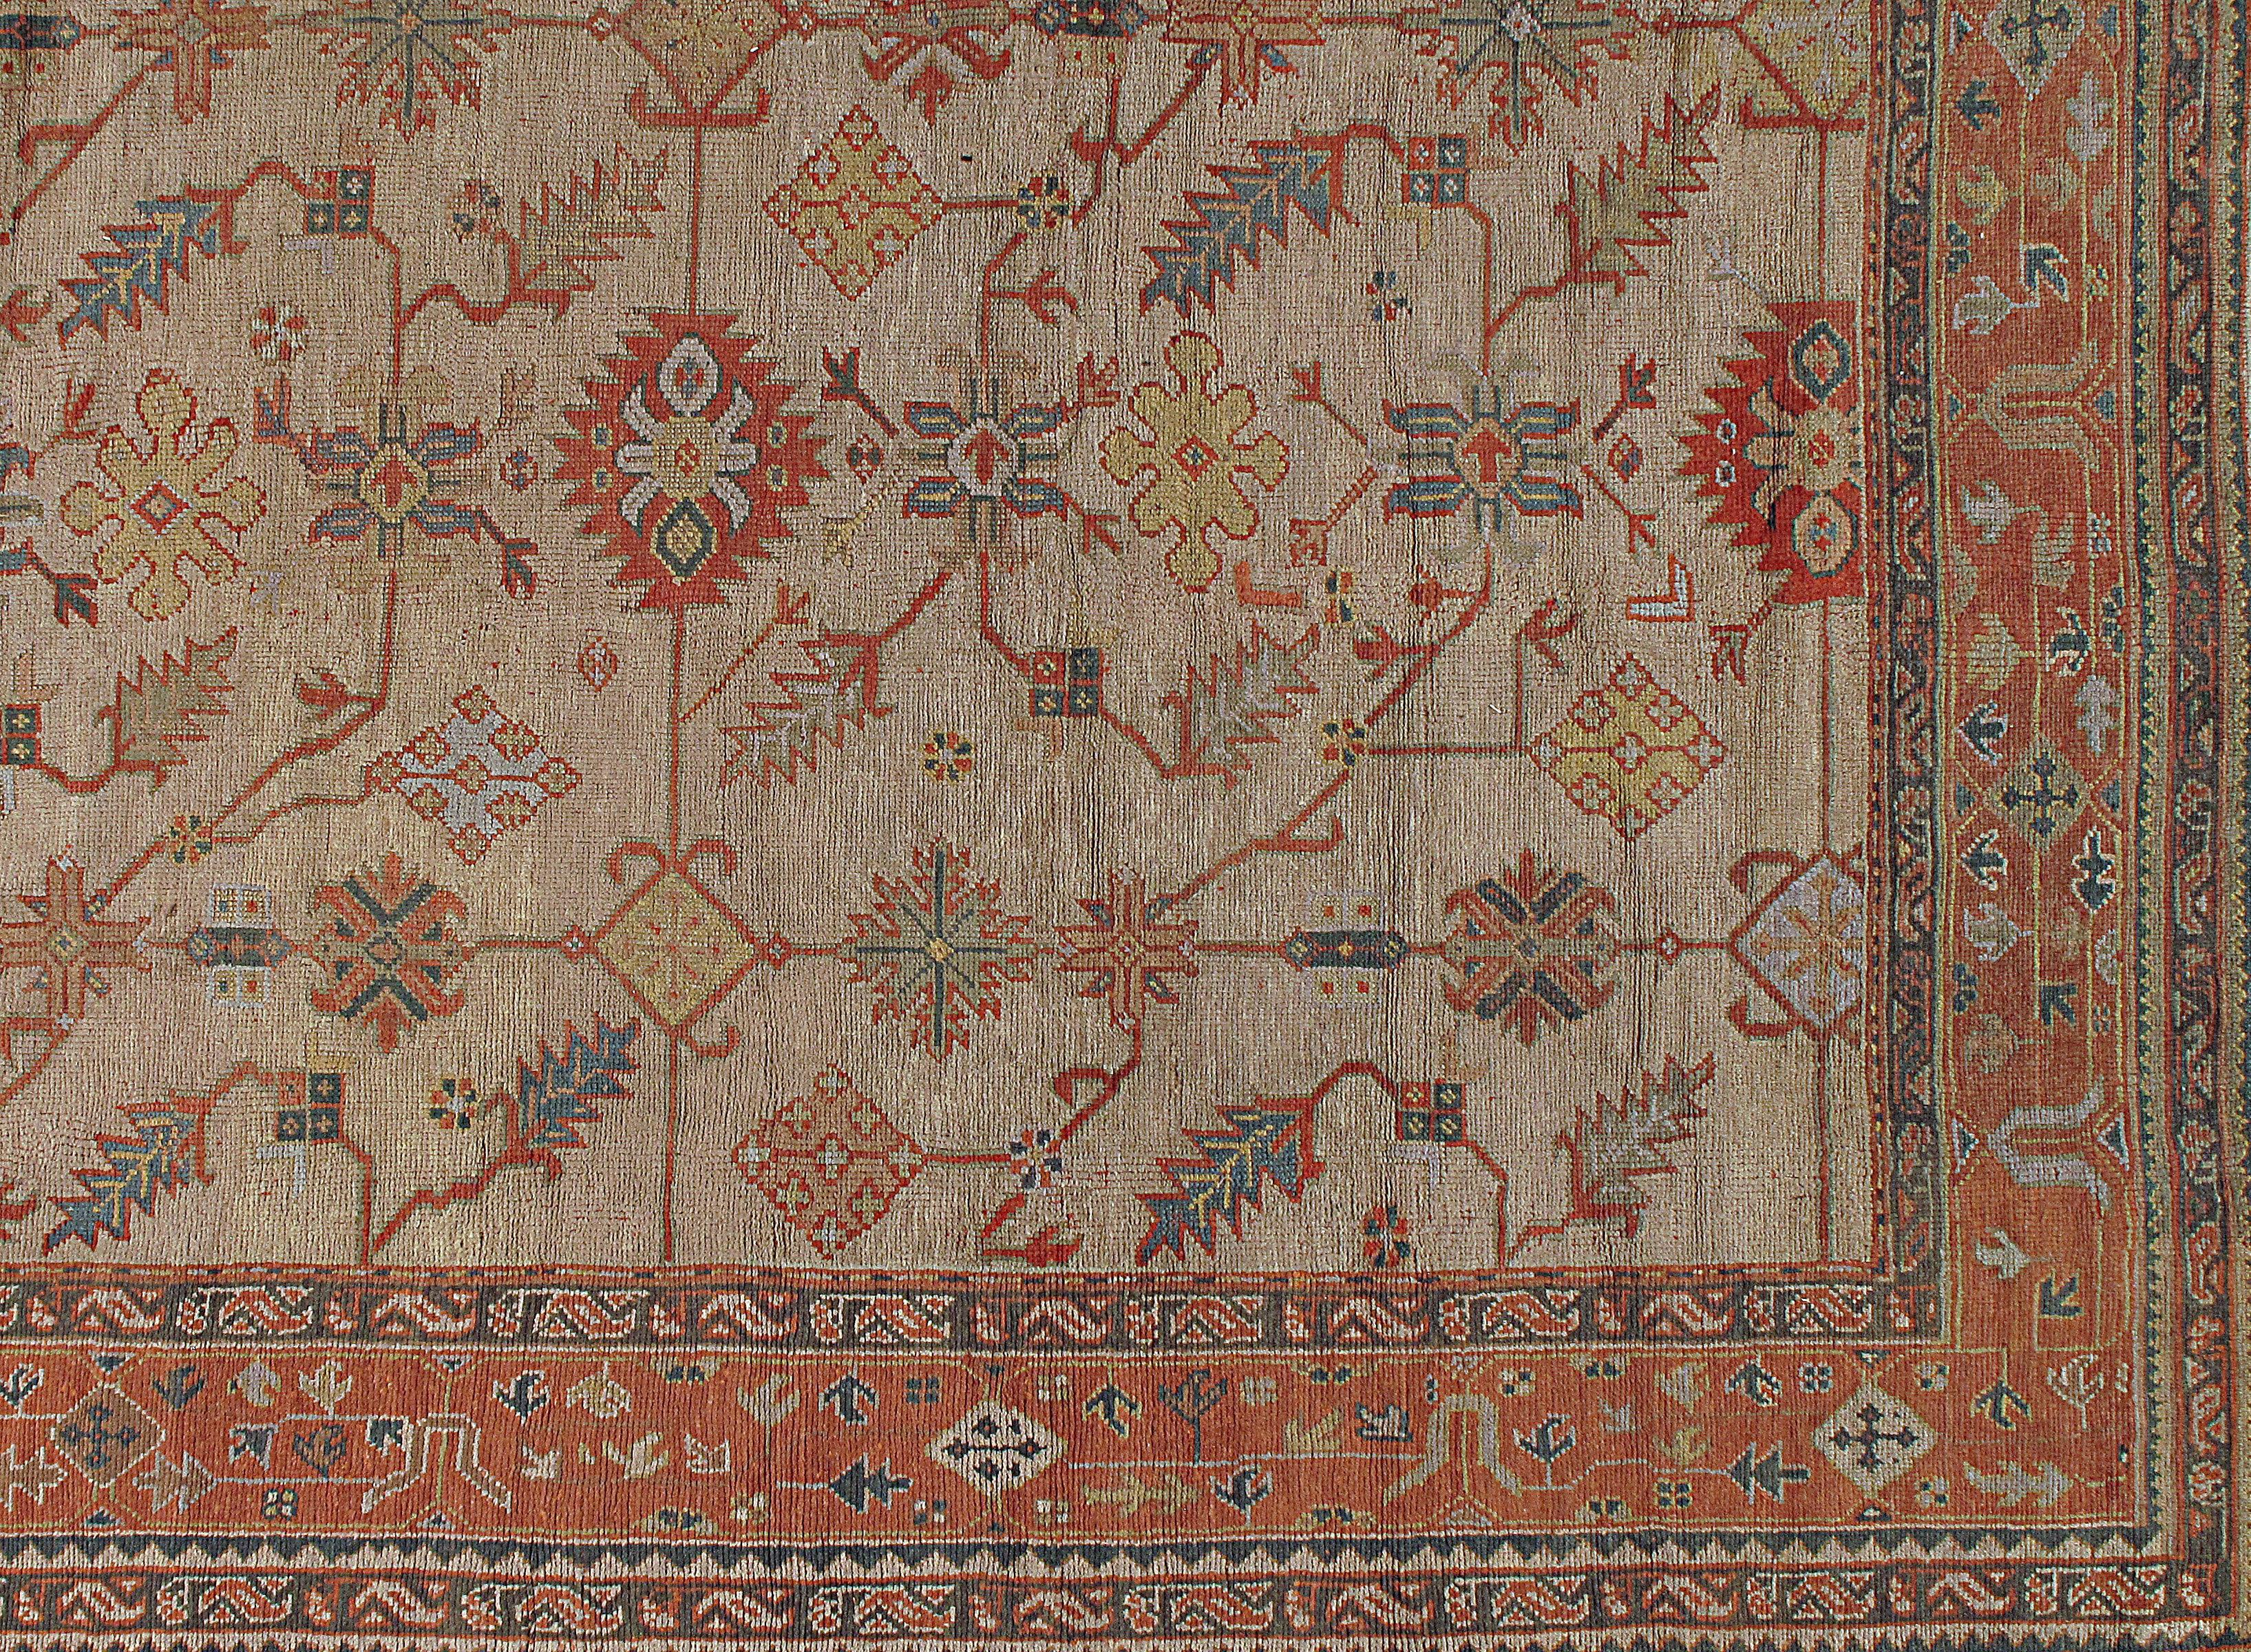 Antique Turkish Oushak rug, 13' x 19'. Oushak in western Turkey has the longest continuous rug weaving history, stretching back at least to the mid-fifteenth century. It has always been oriented commercially, supplying rugs and carpets, from